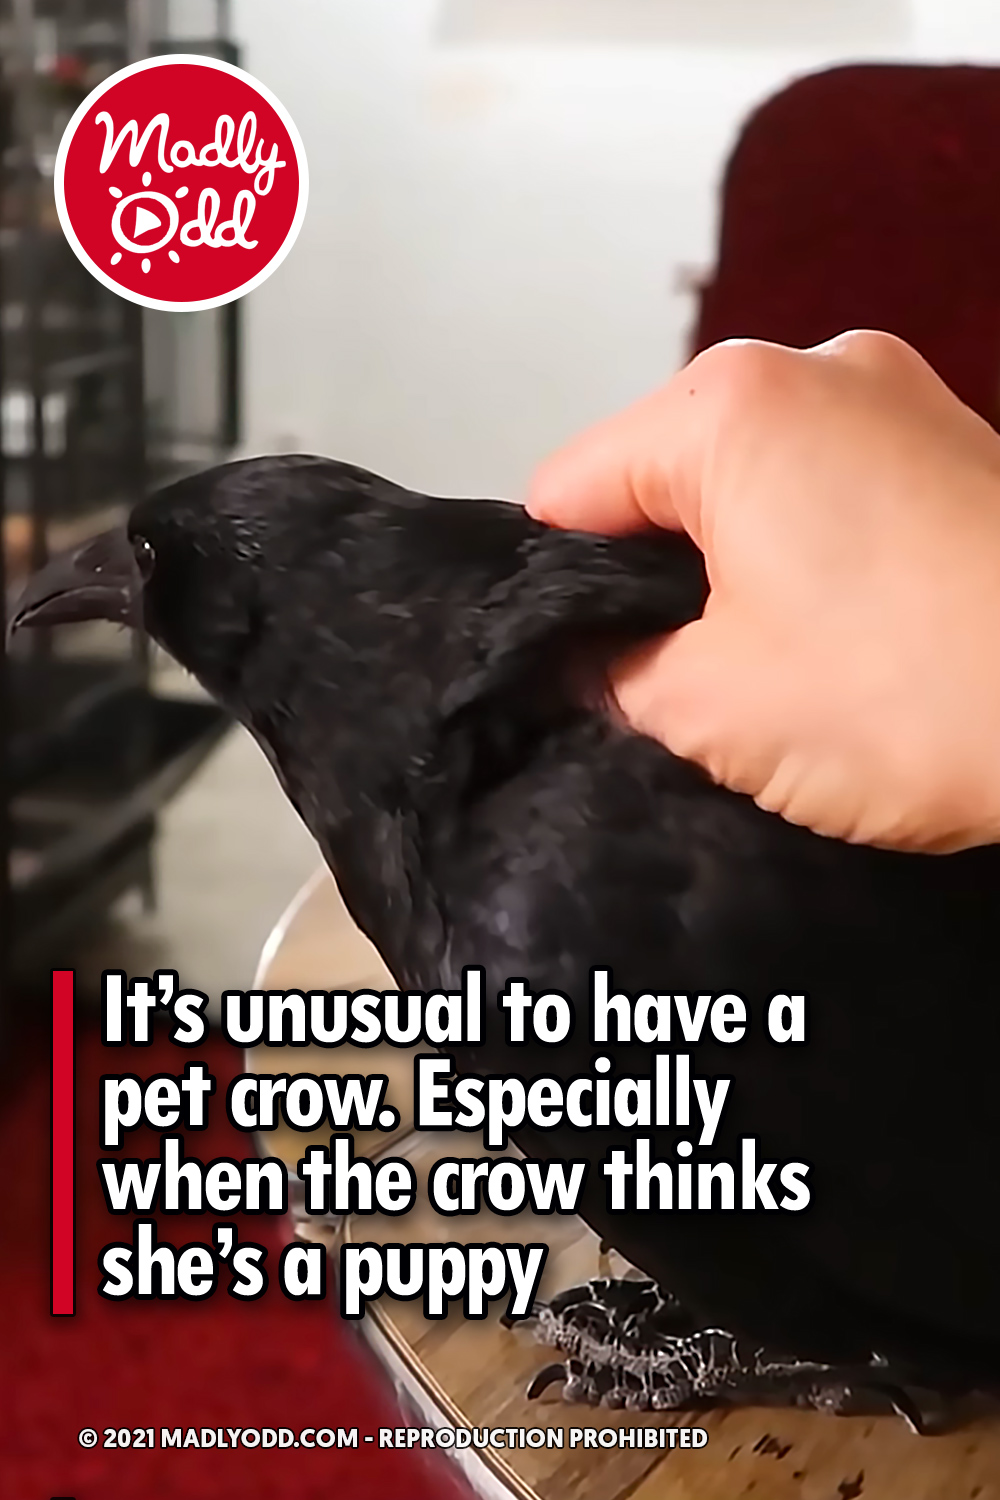 It’s unusual to have a pet crow. Especially when the crow thinks she’s a puppy